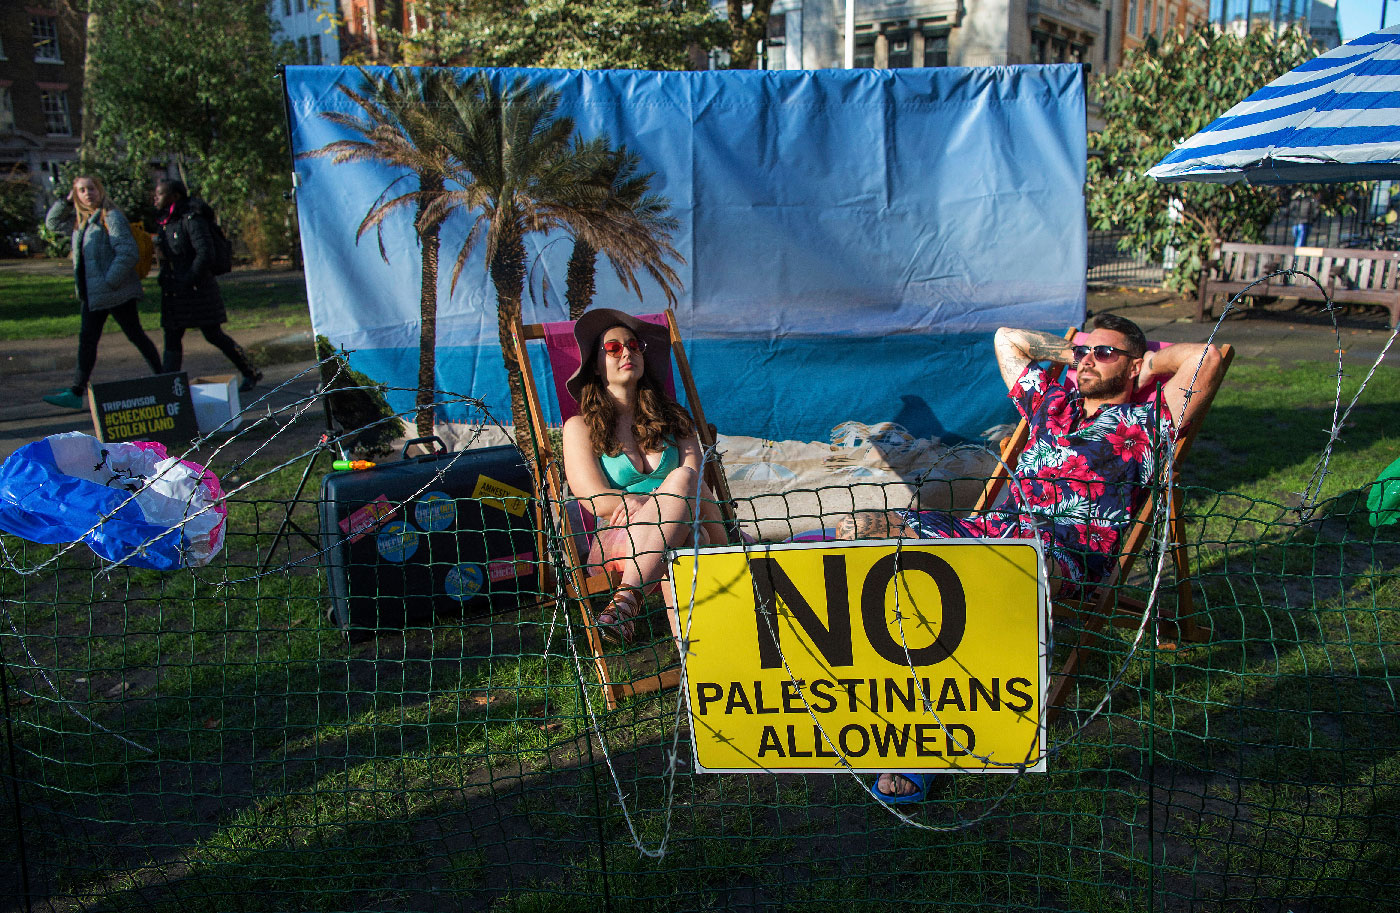 Two models sit on a "barbed-wire beach" outside the offices of TripAdvisor in Soho Square, as part of an Amnesty International campaign calling on the firm and other travel companies to stop listing rooms and activities in Israeli settlements in the Palestinian Territories on 30 January 2019 in London, England.